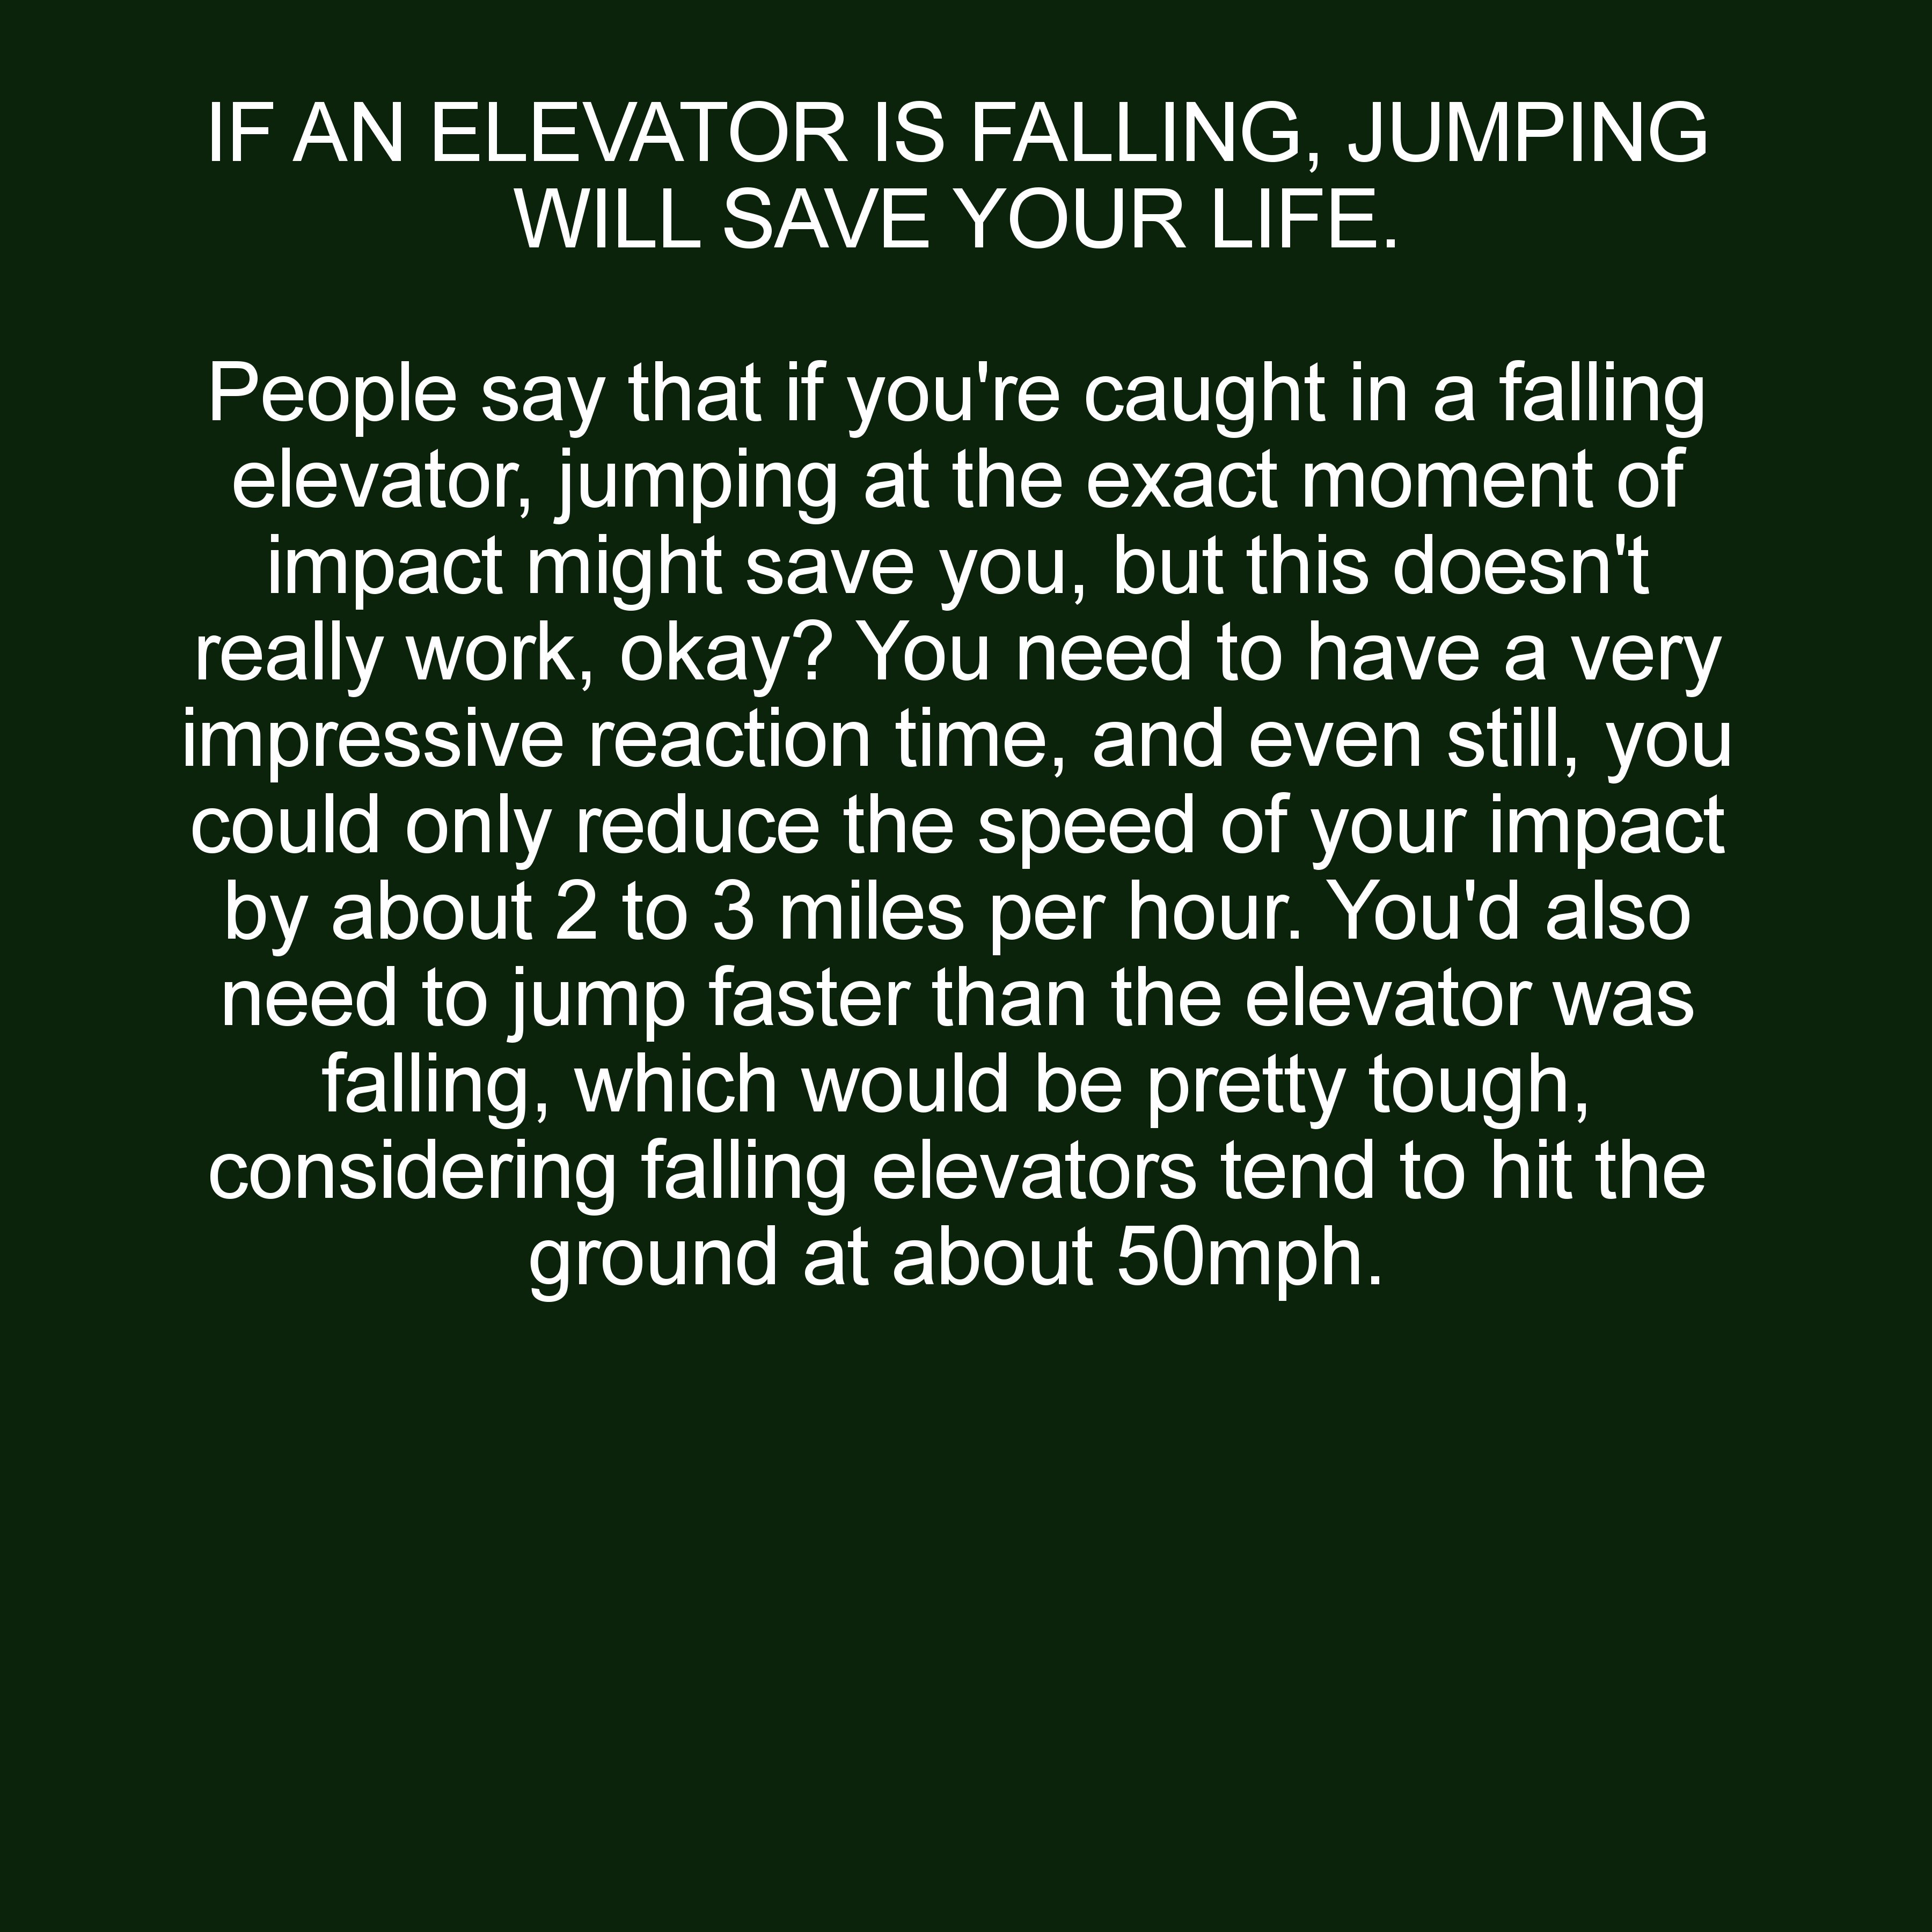 witze - If An Elevator Is Falling, Jumping Will Save Your Life. People say that if you're caught in a falling elevator, jumping at the exact moment of impact might save you, but this doesn't really work, okay? You need to have a very impressive reaction t